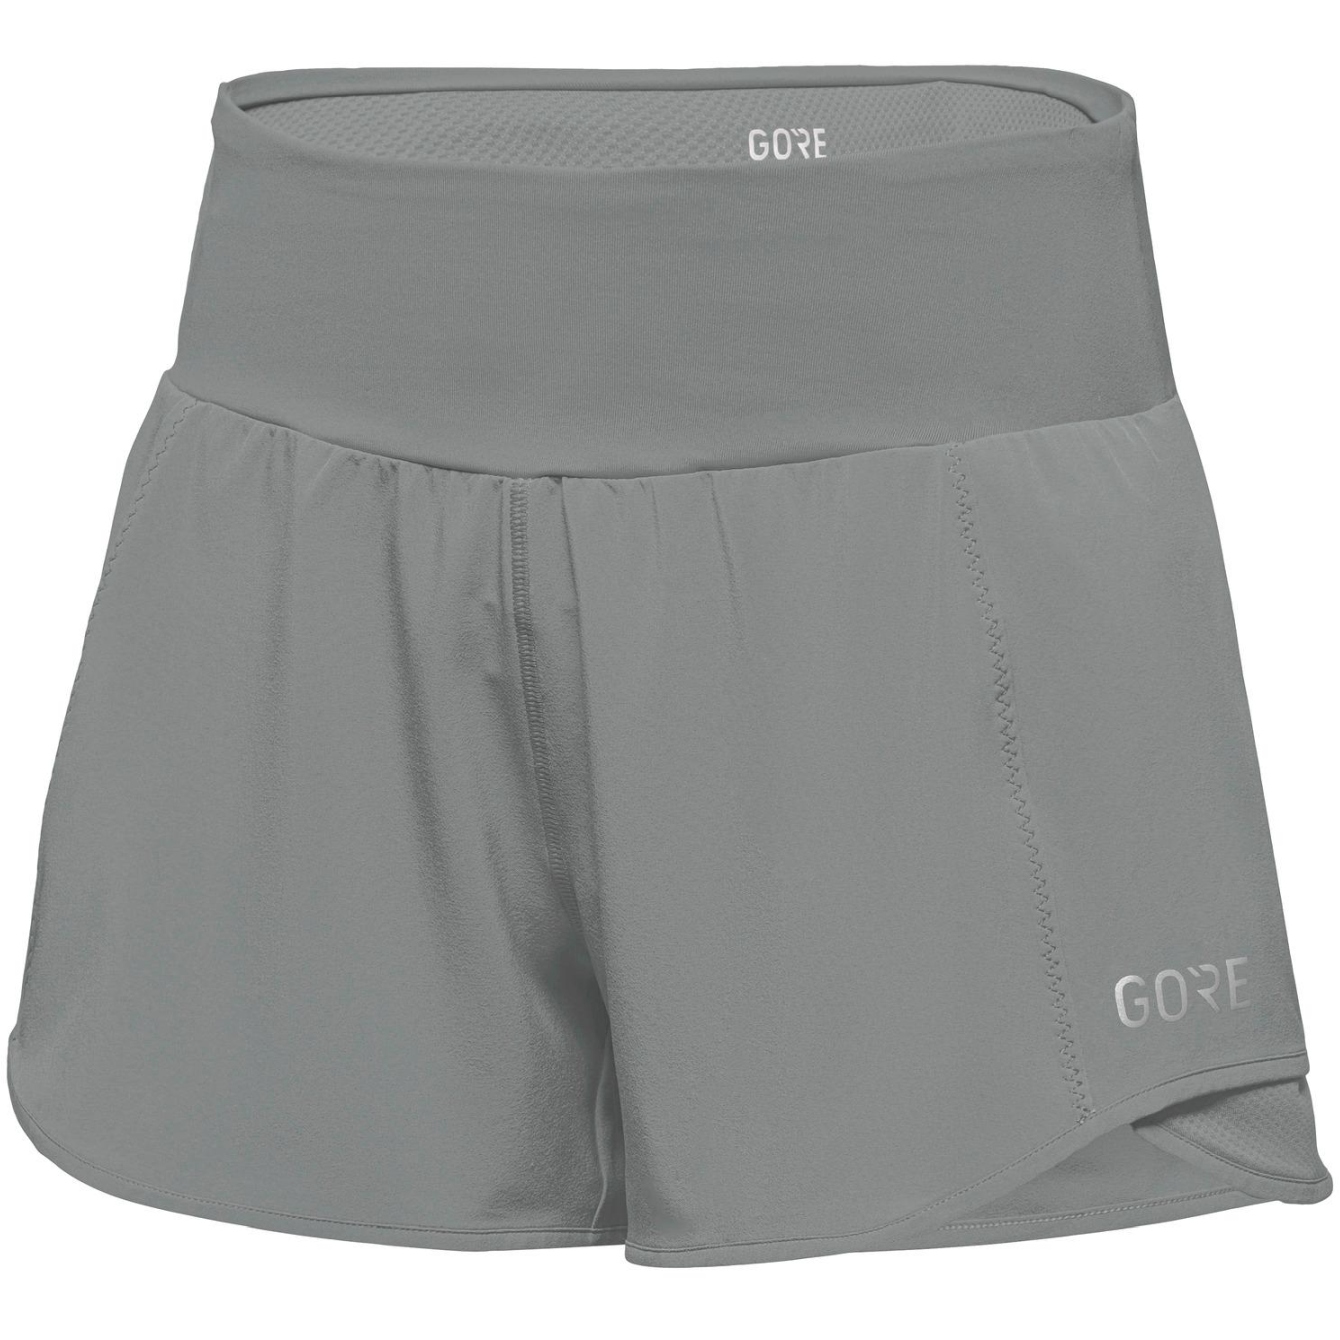 Picture of GOREWEAR R5 Light Shorts Women - lab gray BF00